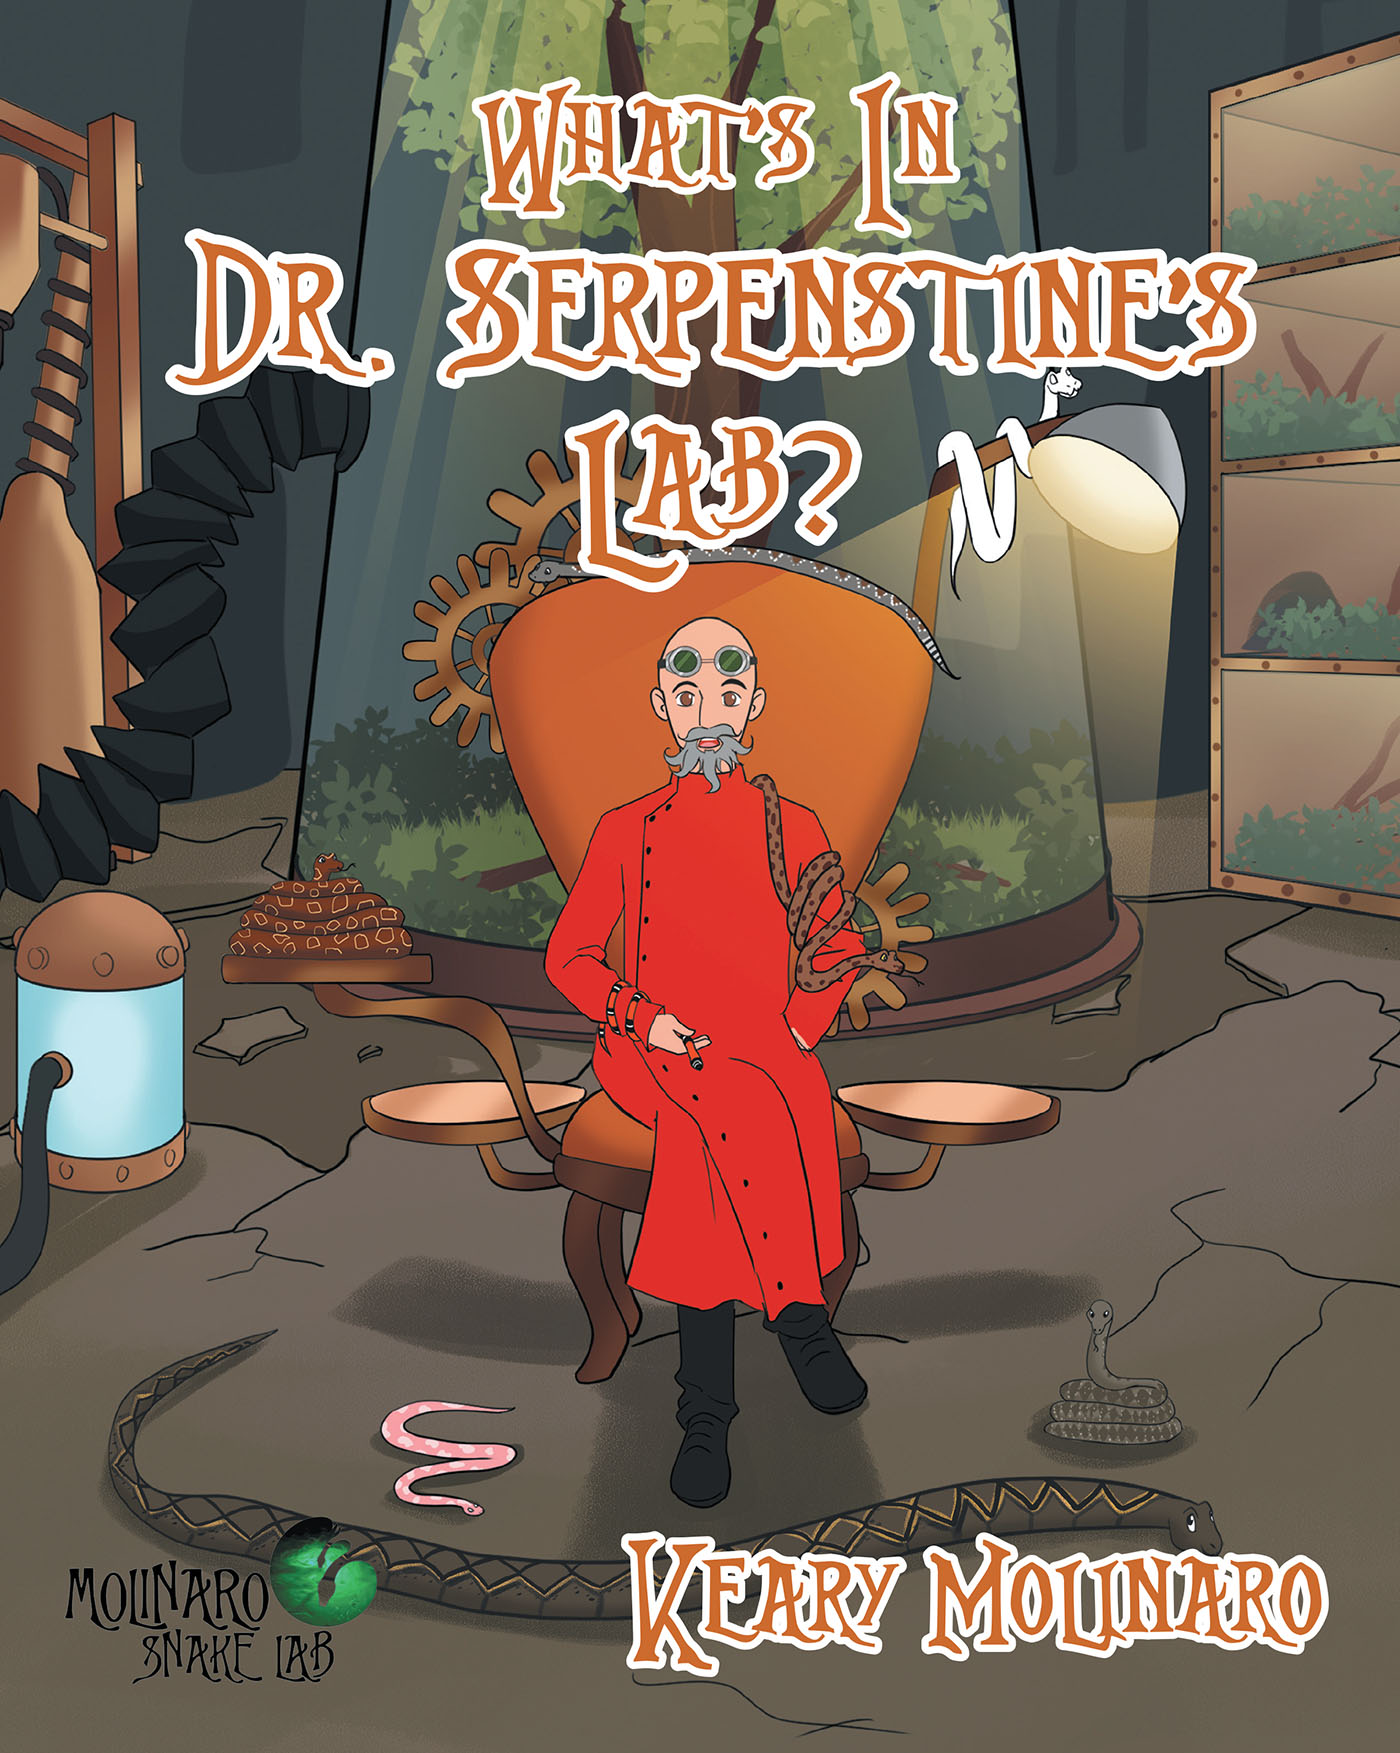 Author Keary Molinaro’s New Book, "What’s in Dr. Serpenstine’s Lab?" Is an Entertaining and Educational Picture Book About Pet Snakes for Young Readers